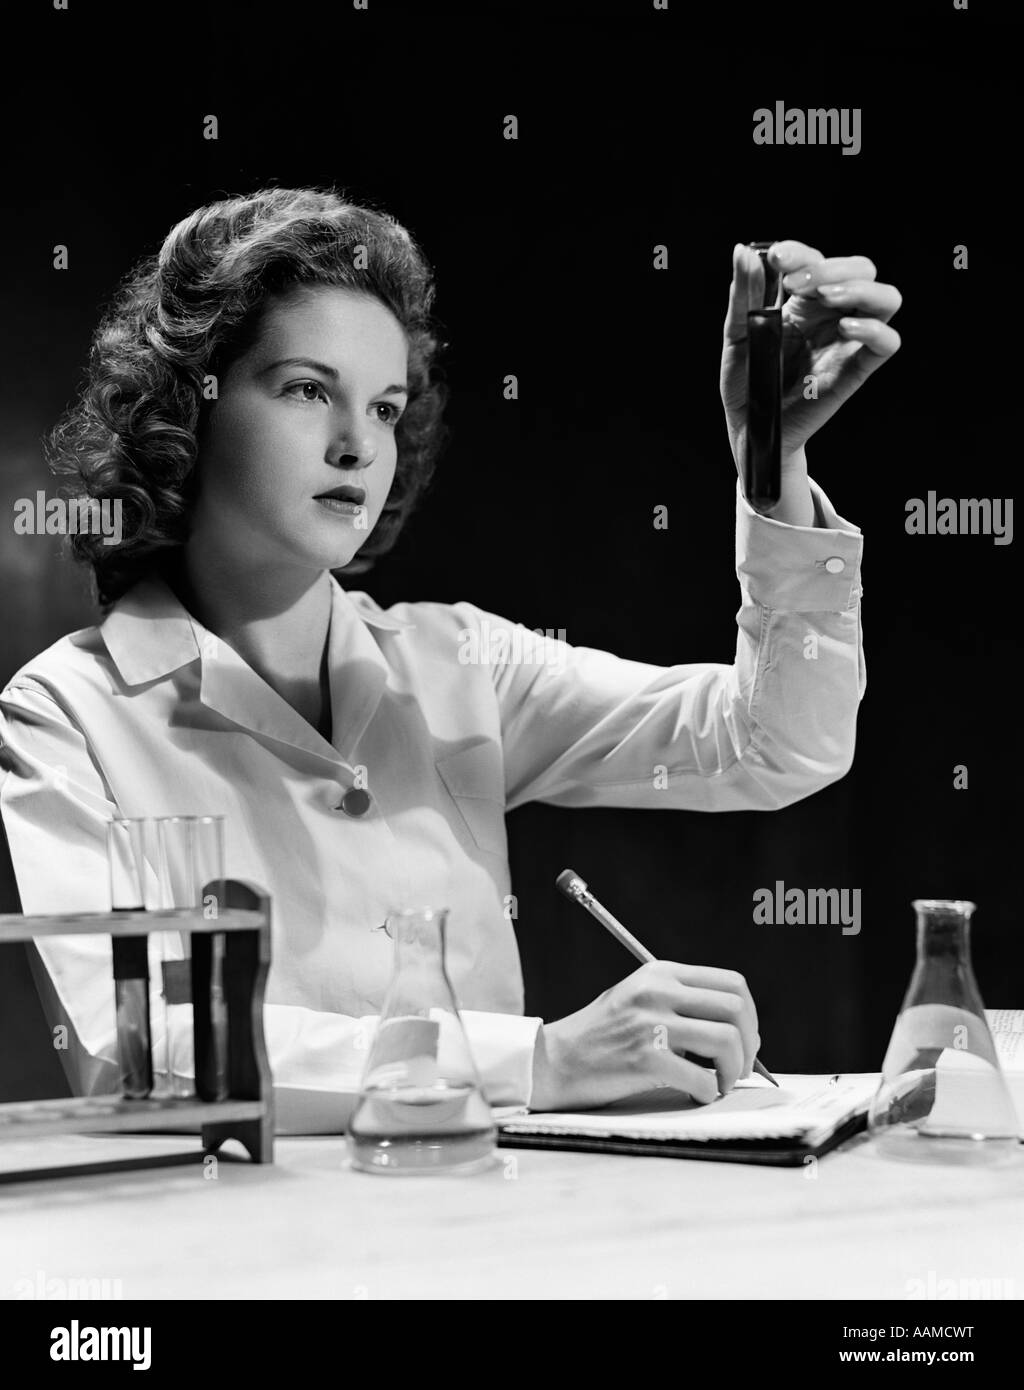 1940s STUDENT NURSE HOLDING UP TEST TUBE WHILE TAKING NOTES IN SCIENCE CLASS Stock Photo